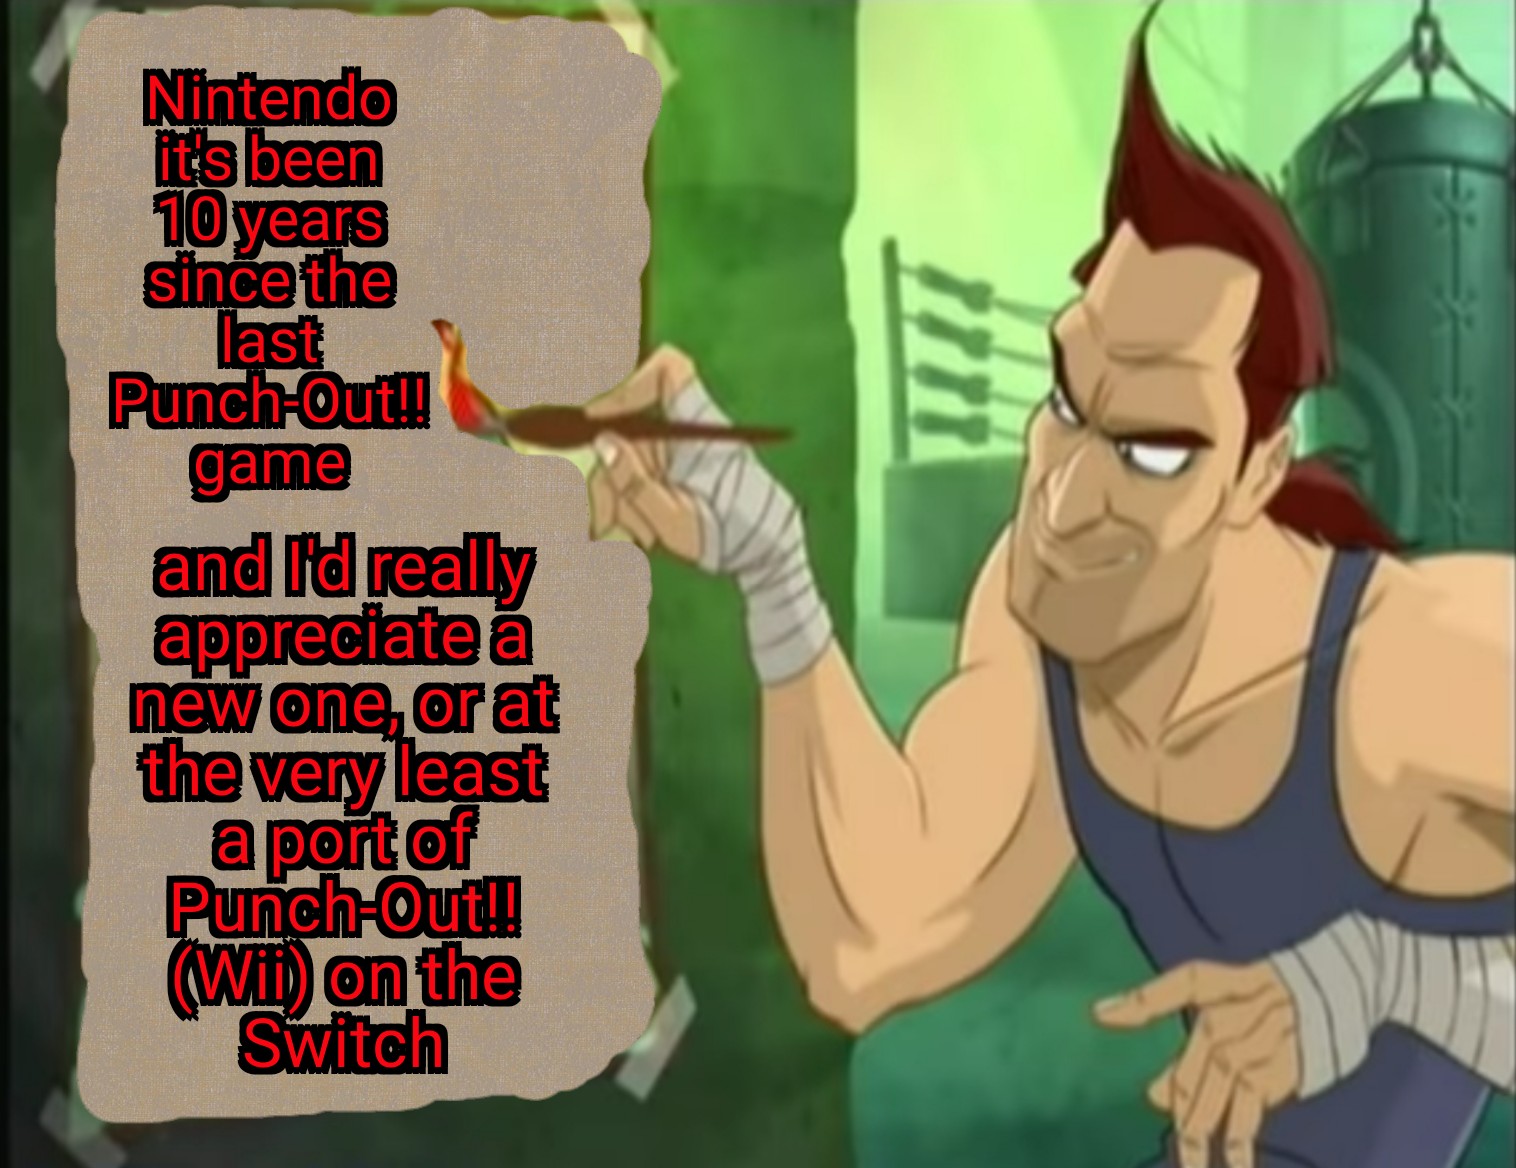 dank memes- nintendo memes - punch out aran ryan - Nintendo it's been 10 years since the last PunchOut!! game and Id really appreciate new one, orat the very least a port of PunchOut!! Wii on the Switch